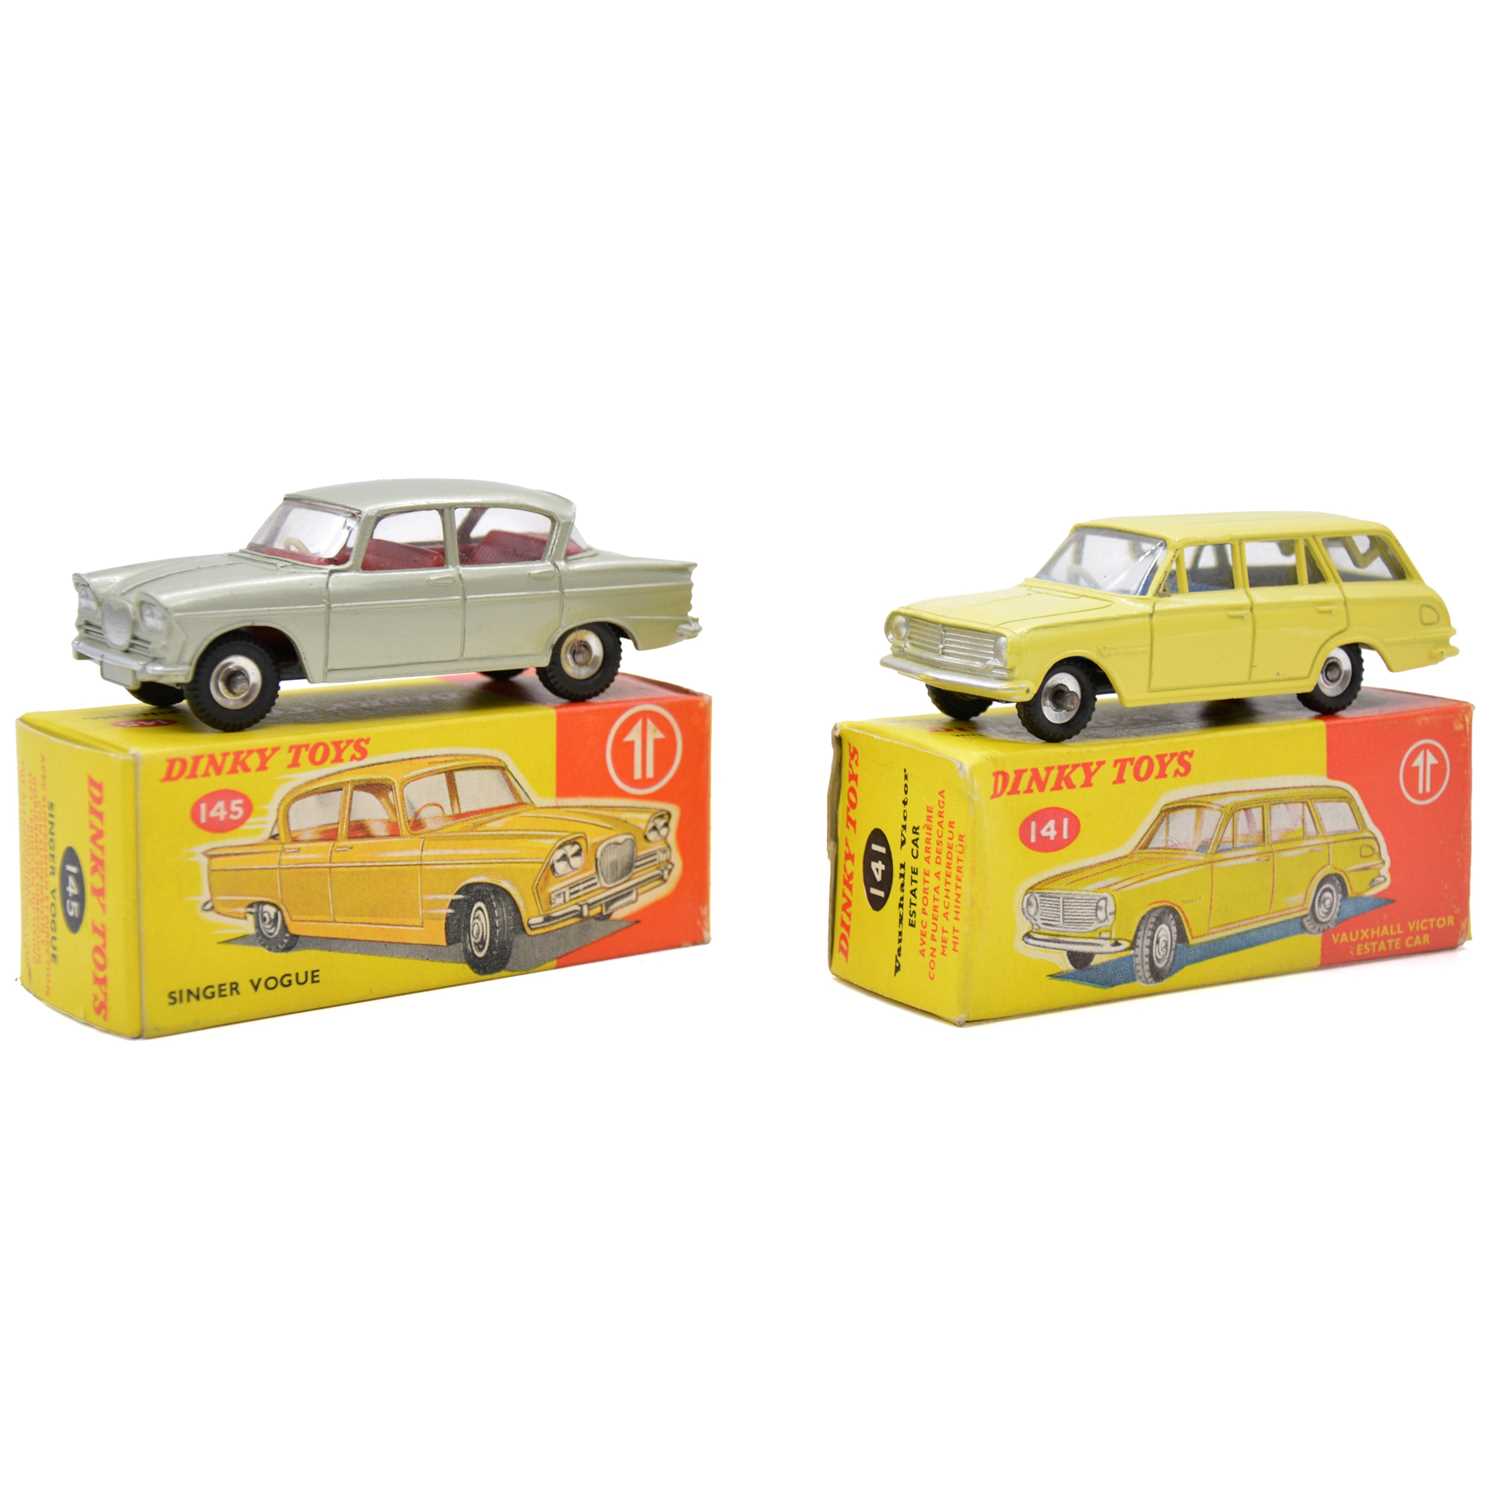 Lot 14 - Dinky Toys models, two including 141 Vauxhall Victor Estate car; 145 Singer Vogue, both boxed.